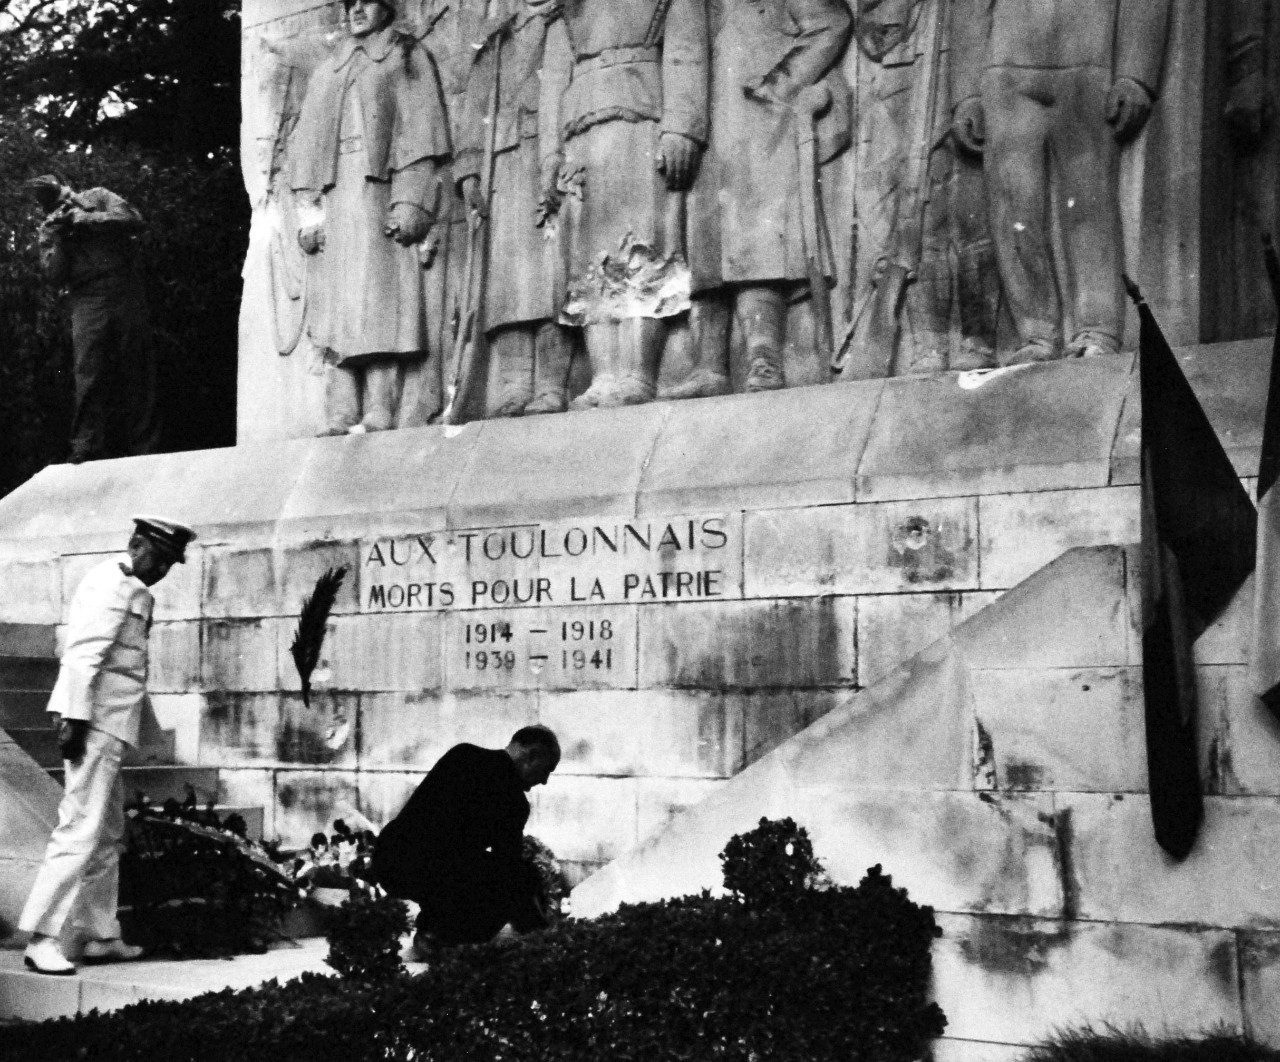 80-G-247155:   High-ranking Allied officers honor the war dead of Toulon, France, before the War Memorial during the celebration of the return of the French Fleet.   Vice Admiral H. Kent Hewitt, USN, lays a wreath at the War Memorial.  Photographed by a crew member of USS Catoctin (AGC-5), received 14 September 1944.   (3/12/2014).   